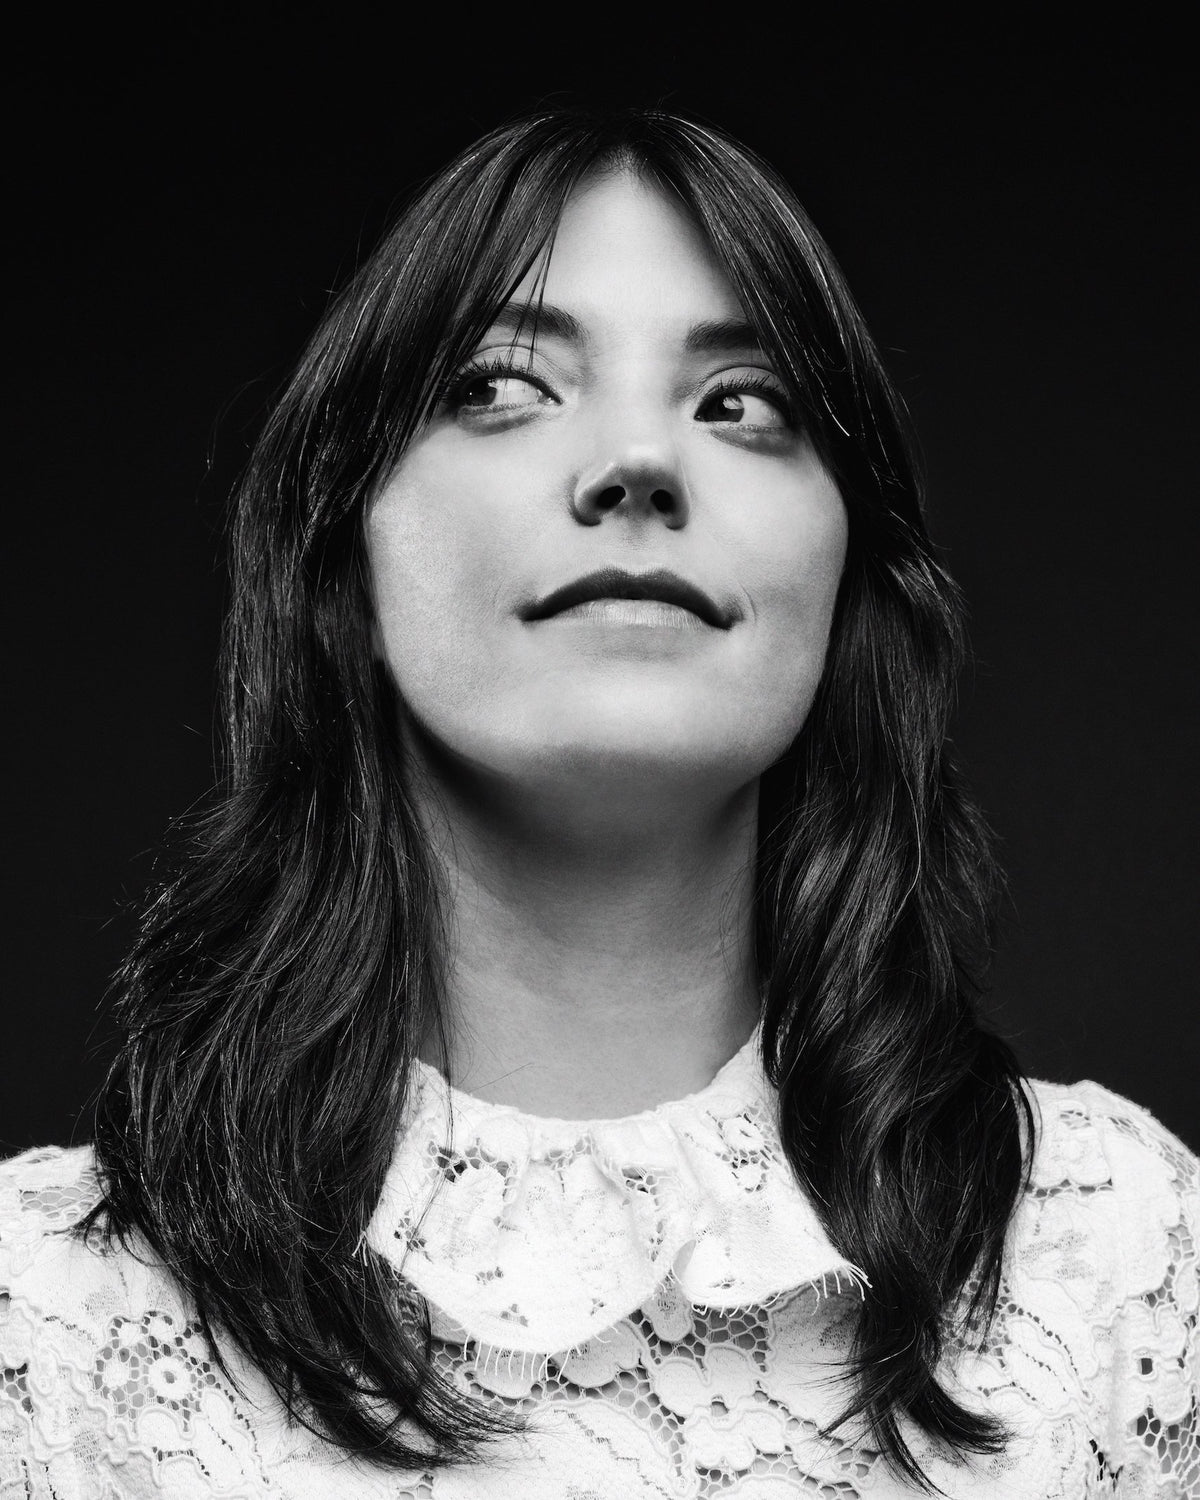 Interview with Sharon Van Etten on "Because I Was In Love"